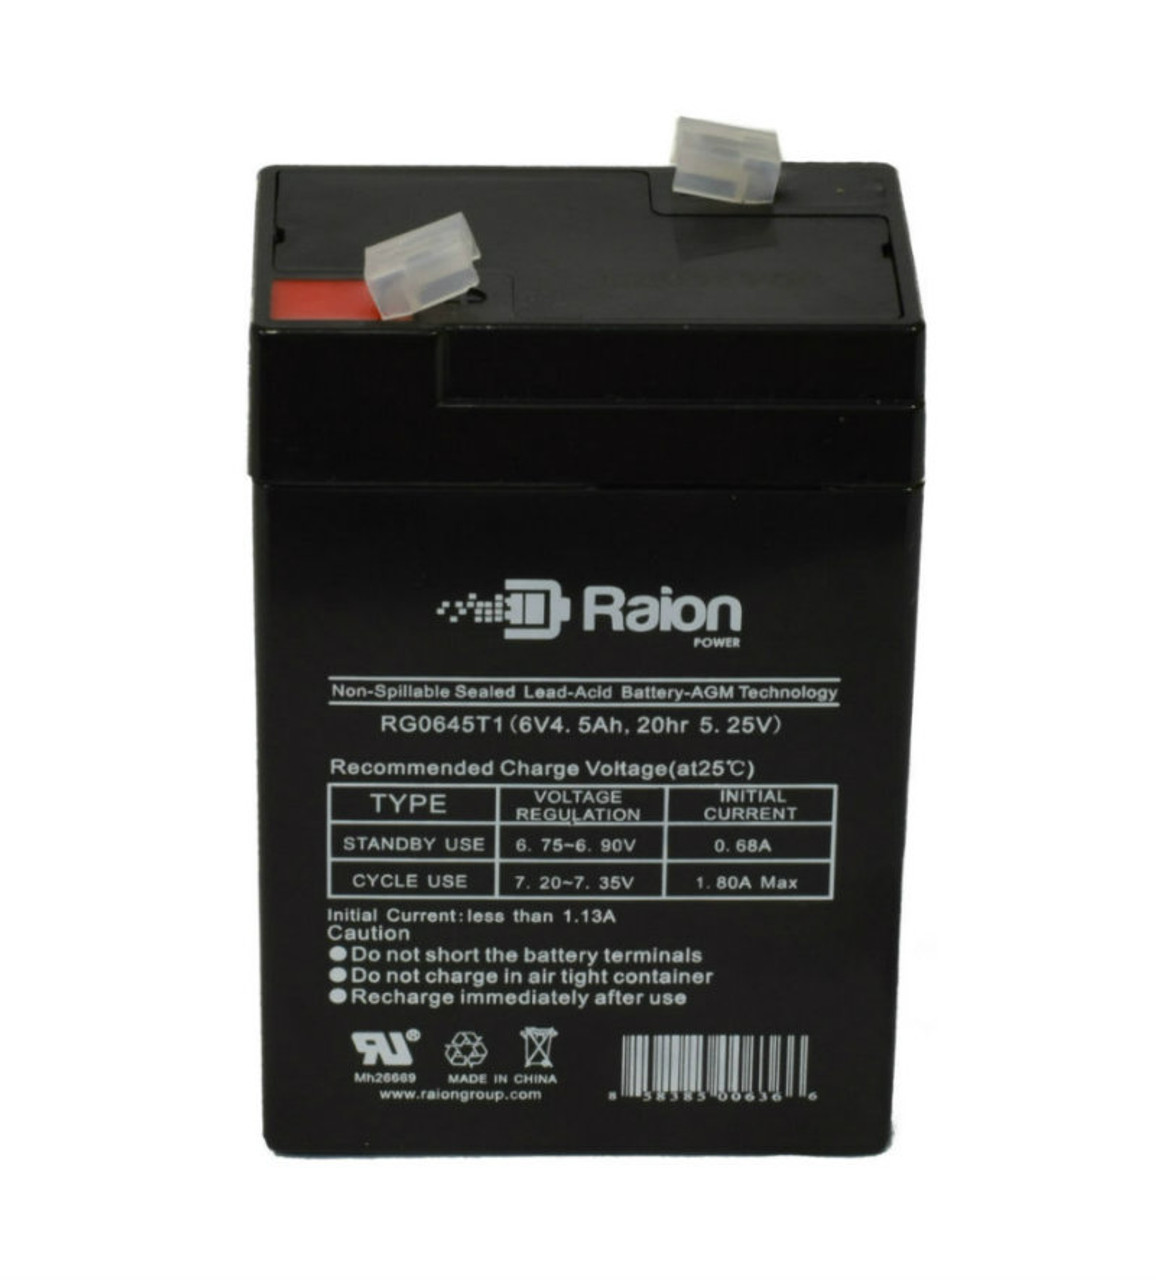 Raion Power RG0645T1 Replacement Battery Cartridge for Amptek AT6-4.5